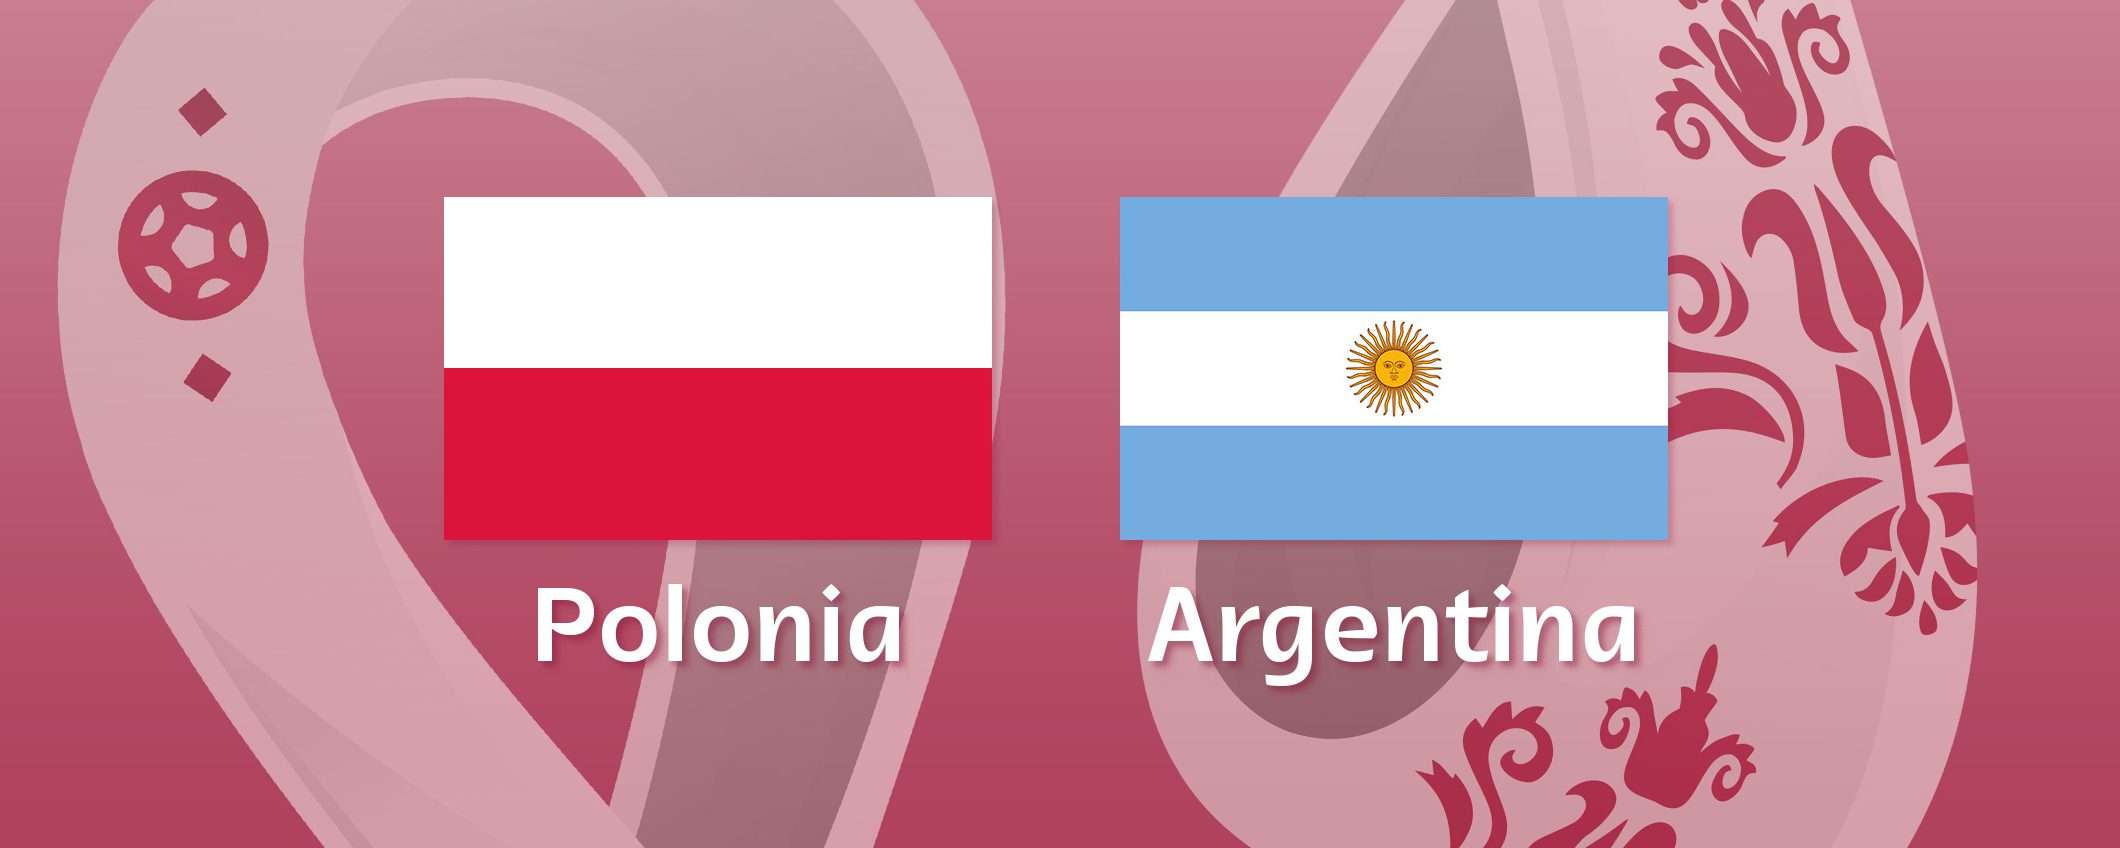 Come vedere Polonia-Argentina in streaming